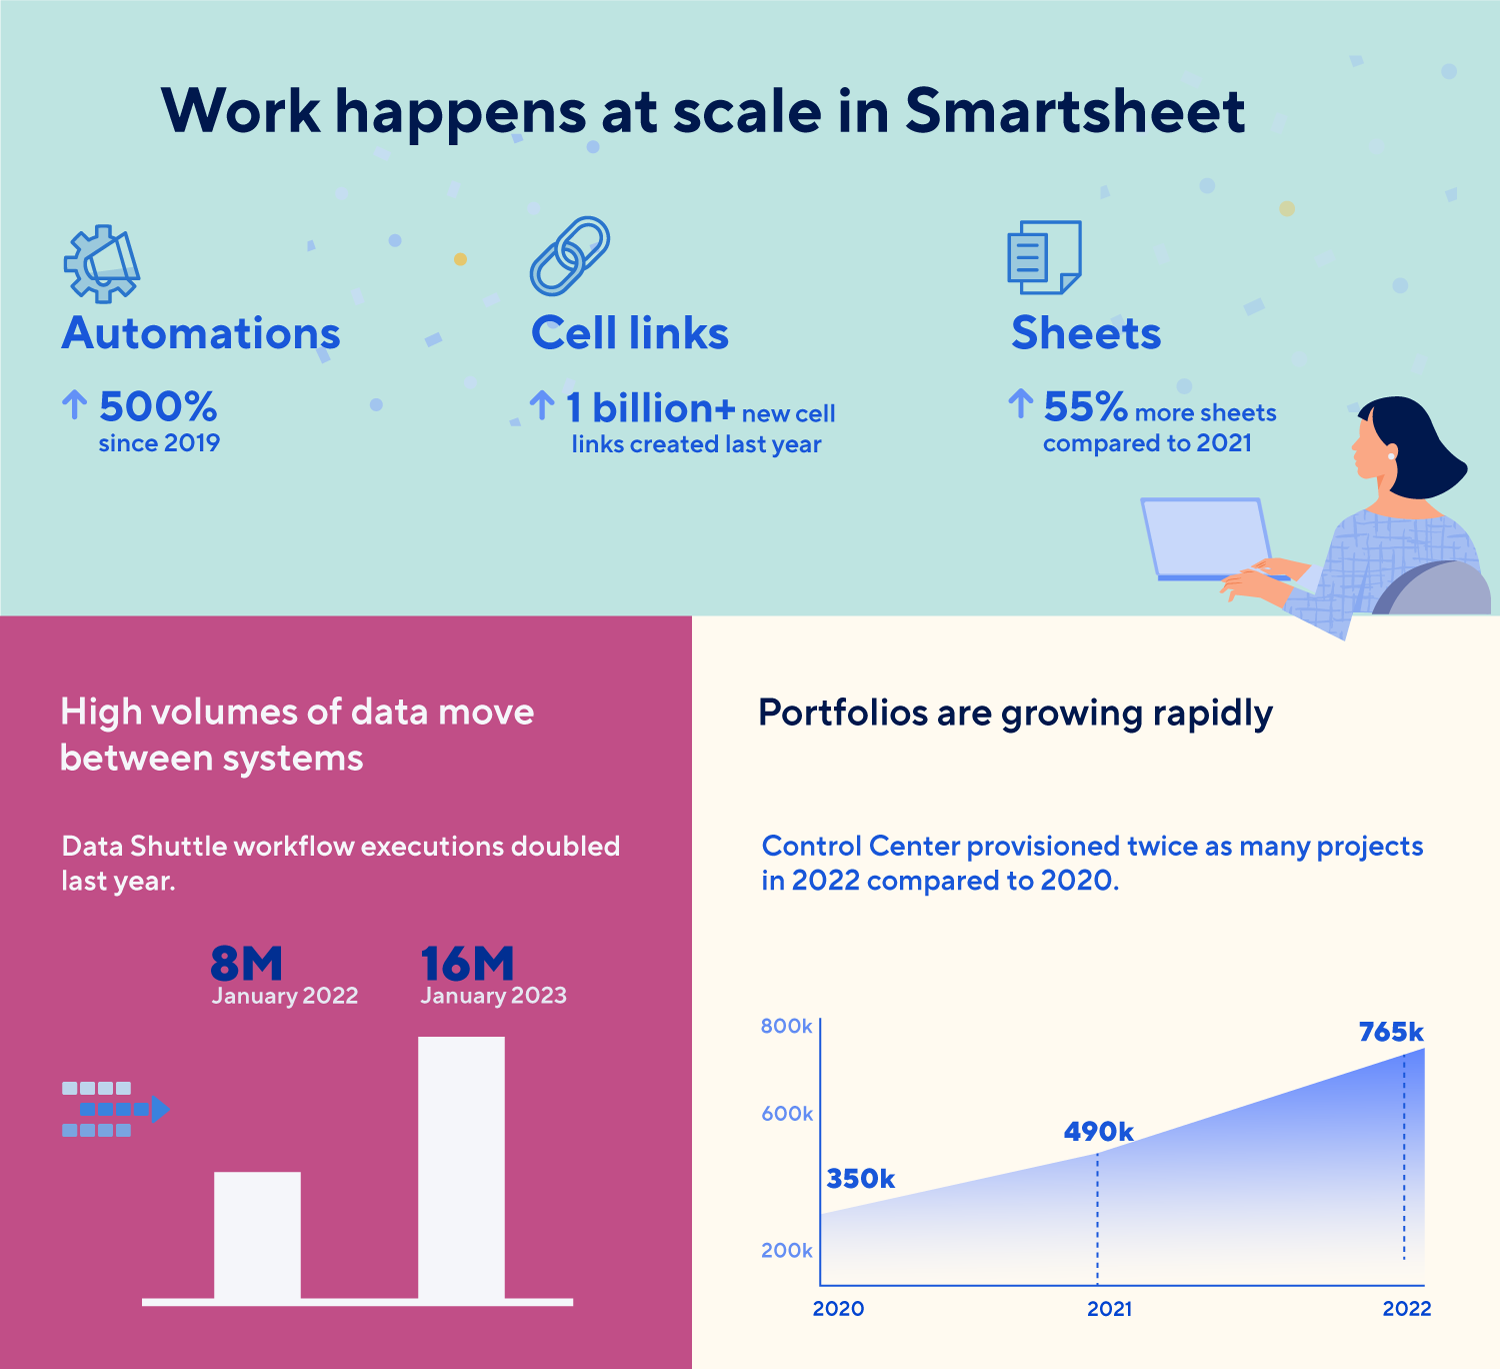 What happens at scale in Smartsheet infographic